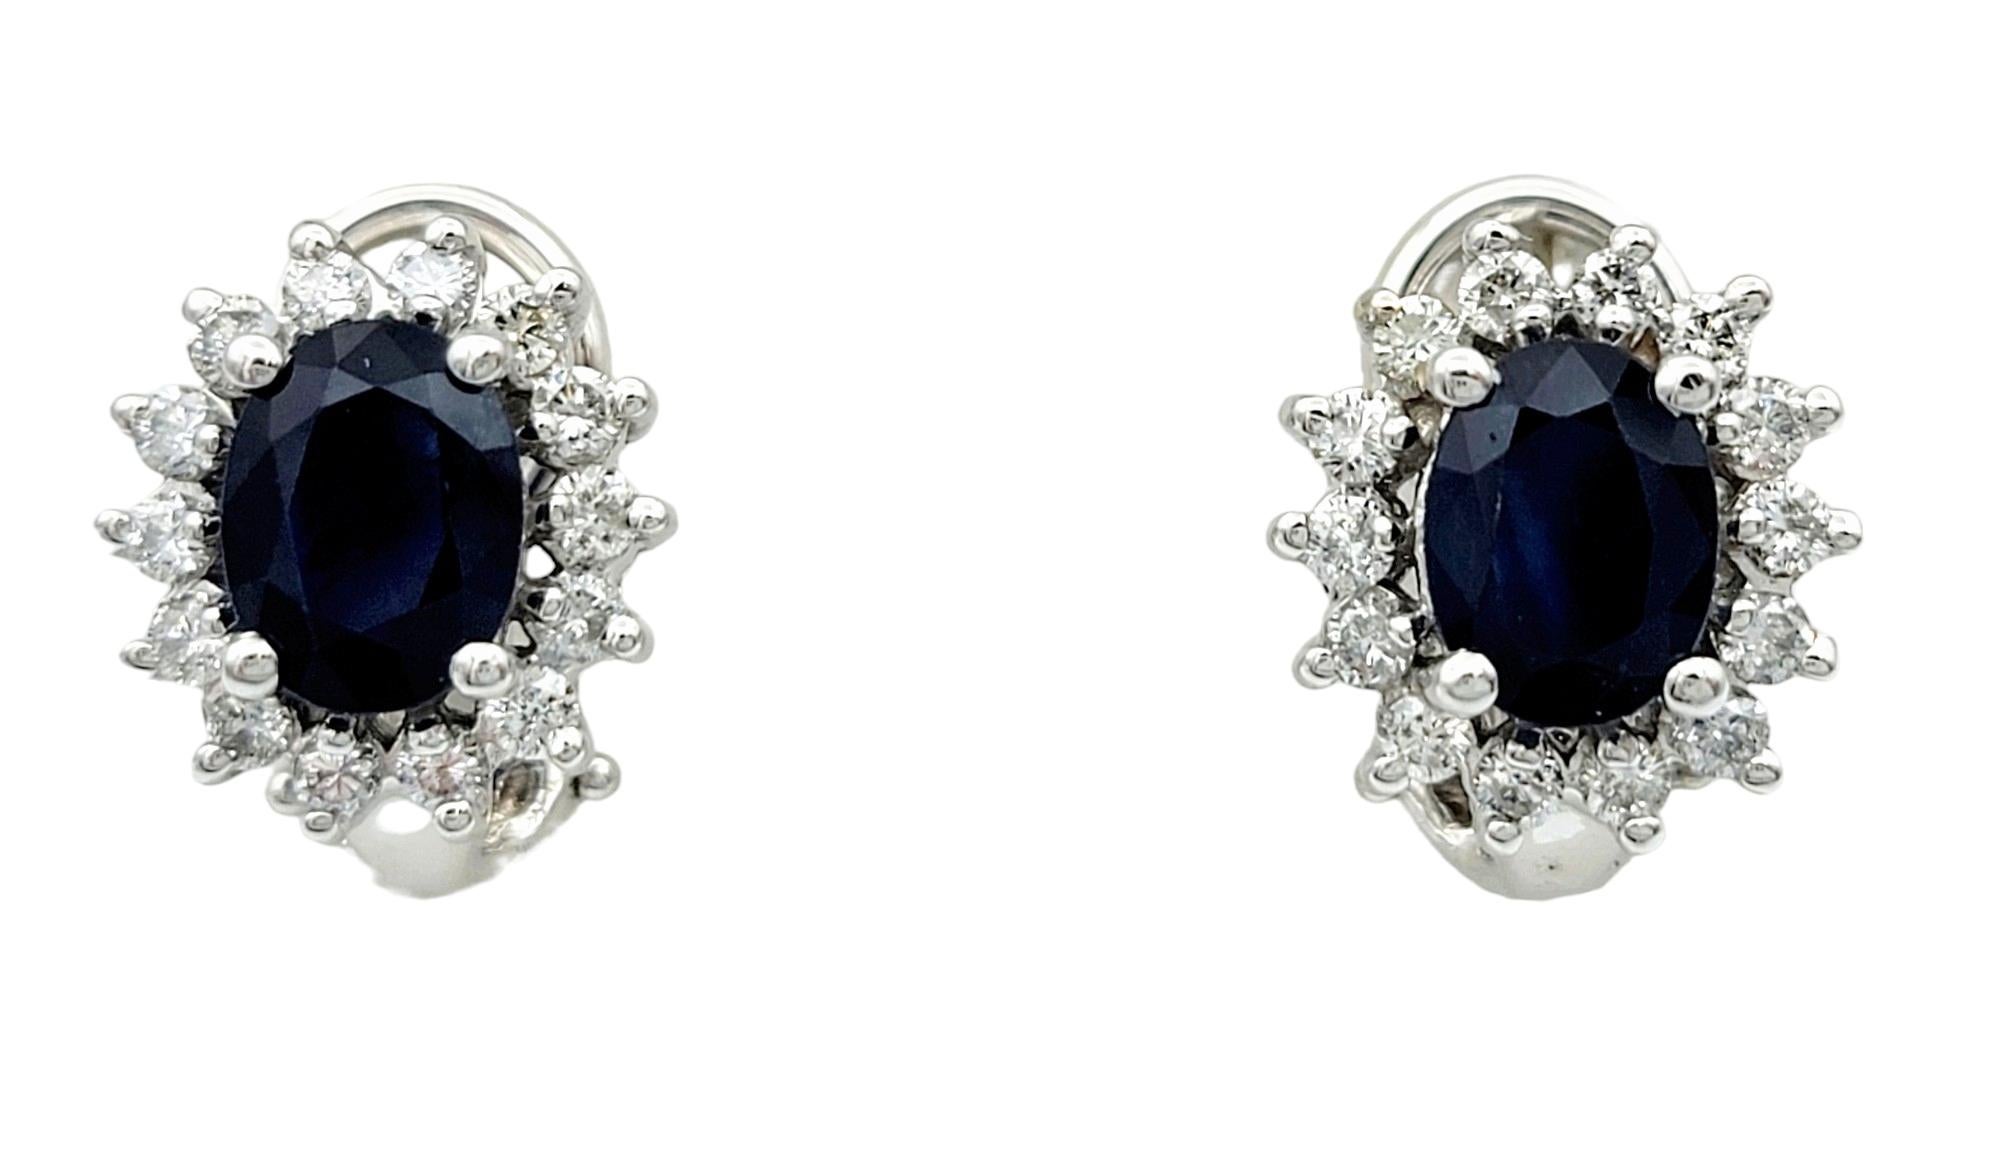 This gorgeous pair of oval blue sapphire stud earrings, adorned with a dazzling round diamond halo and set in elegant 14 karat white gold, epitomize sophistication and allure. Each earring features a captivating oval blue sapphire at its center,